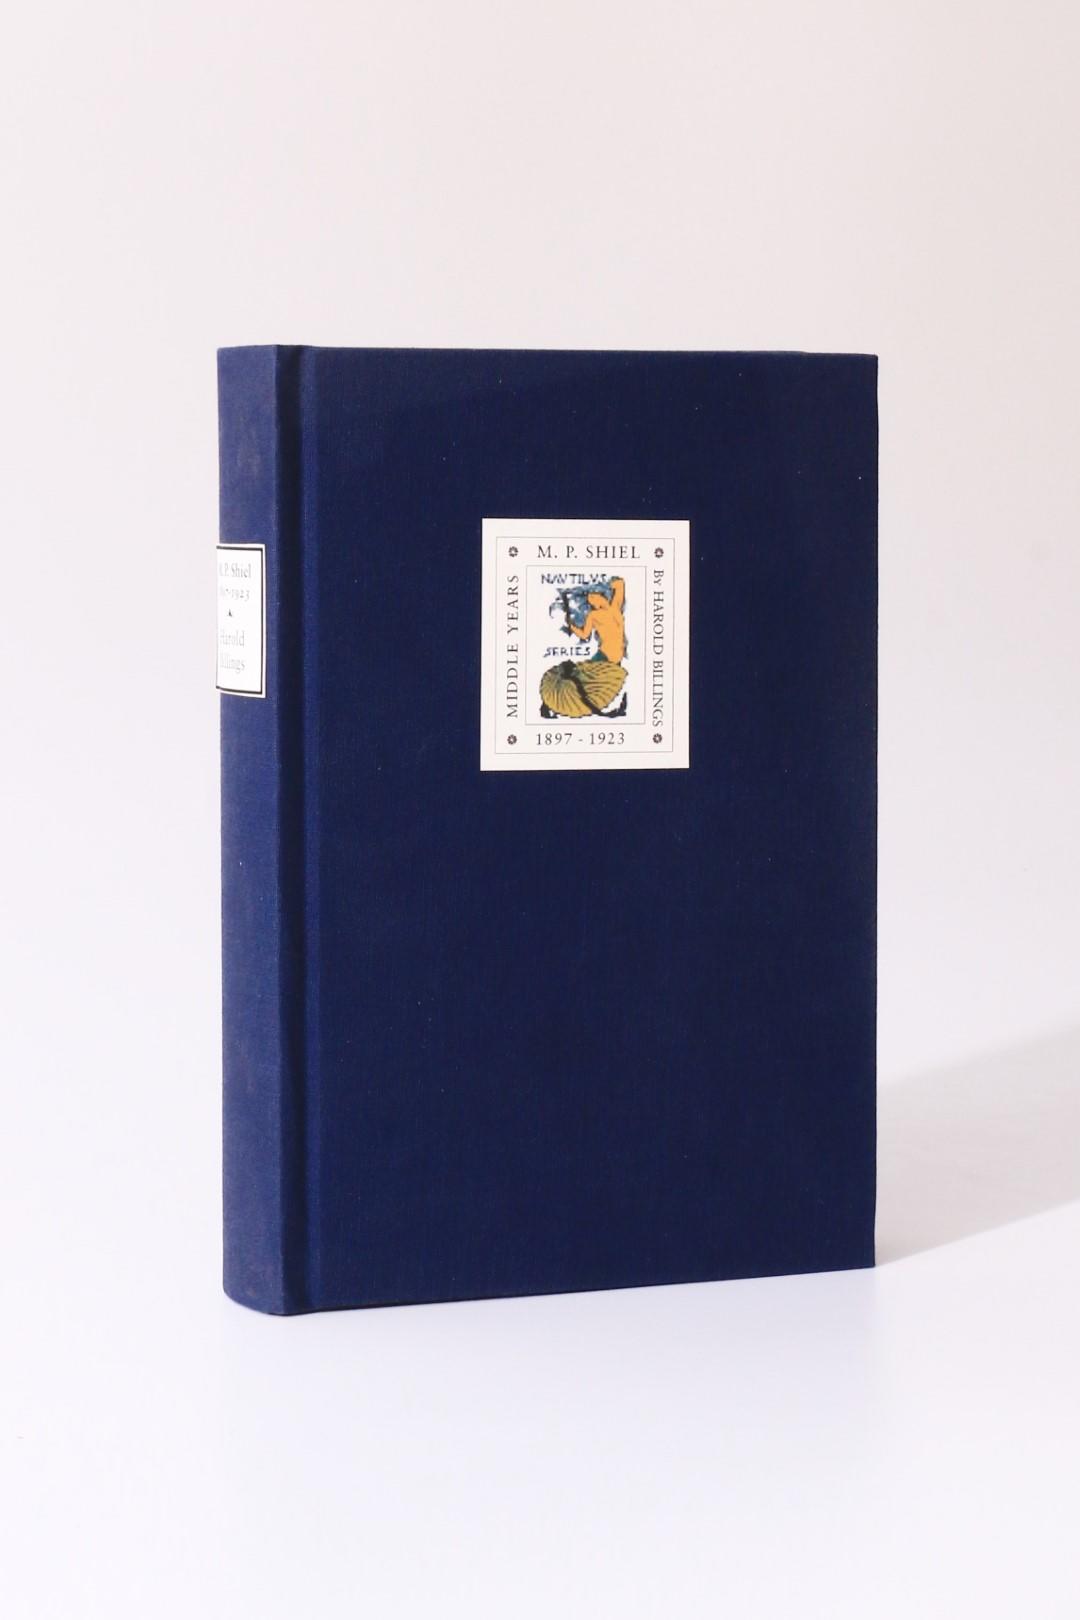 Harold Billings - M.P. Shiel - Middle Years, 1897-1923 - Roger Beacham, 2010, First Edition.